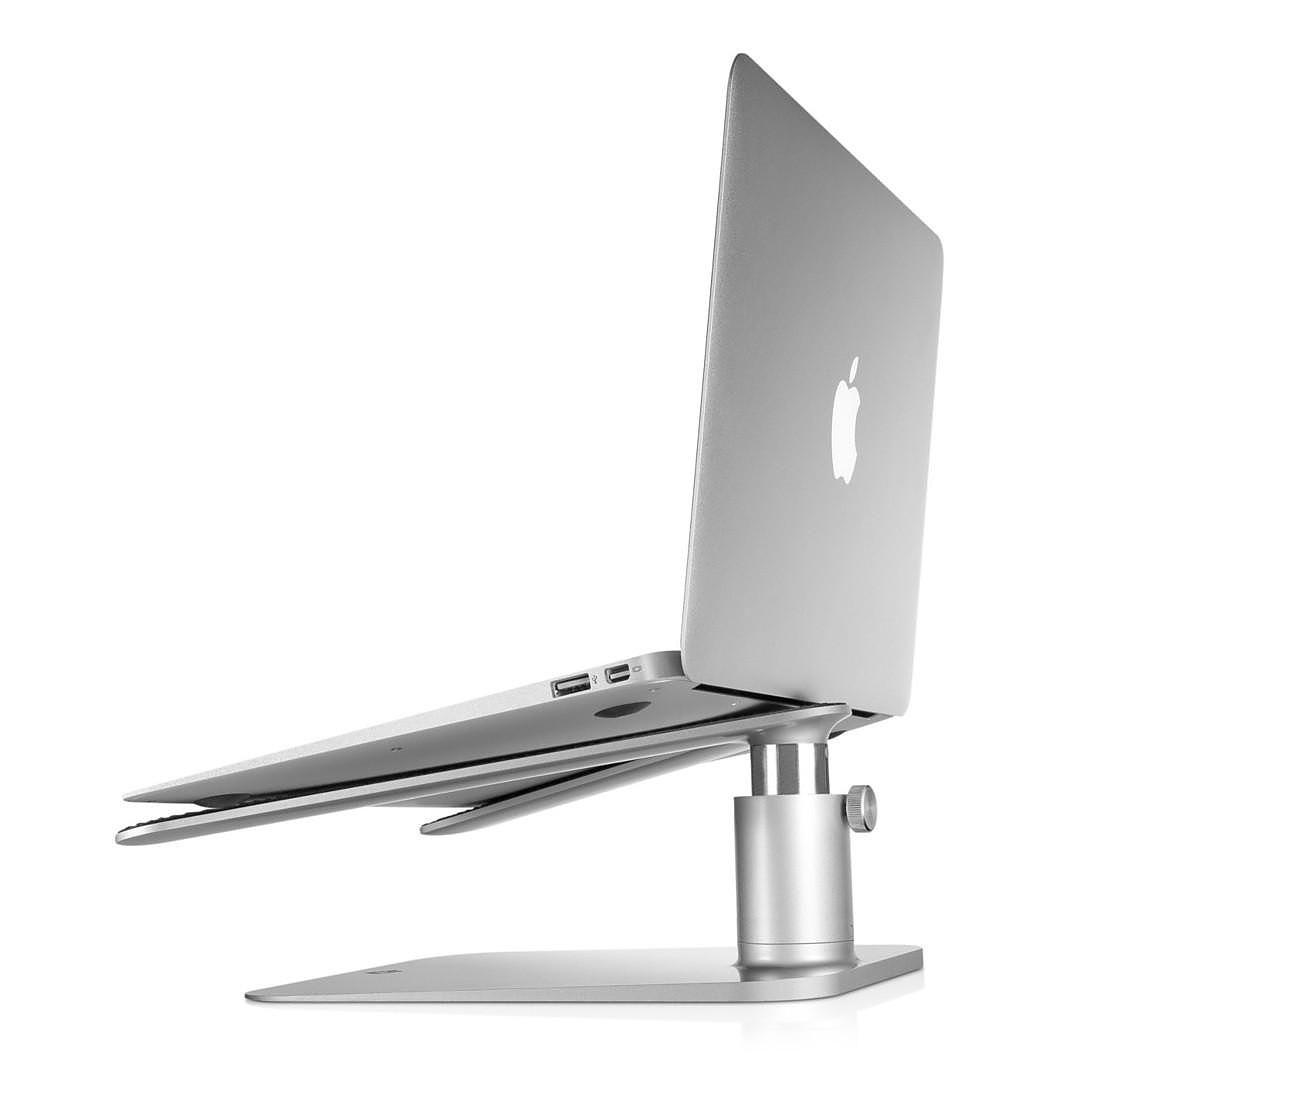 HiRise Adjustable MacBook Stand by Twelve South. - Design Is This